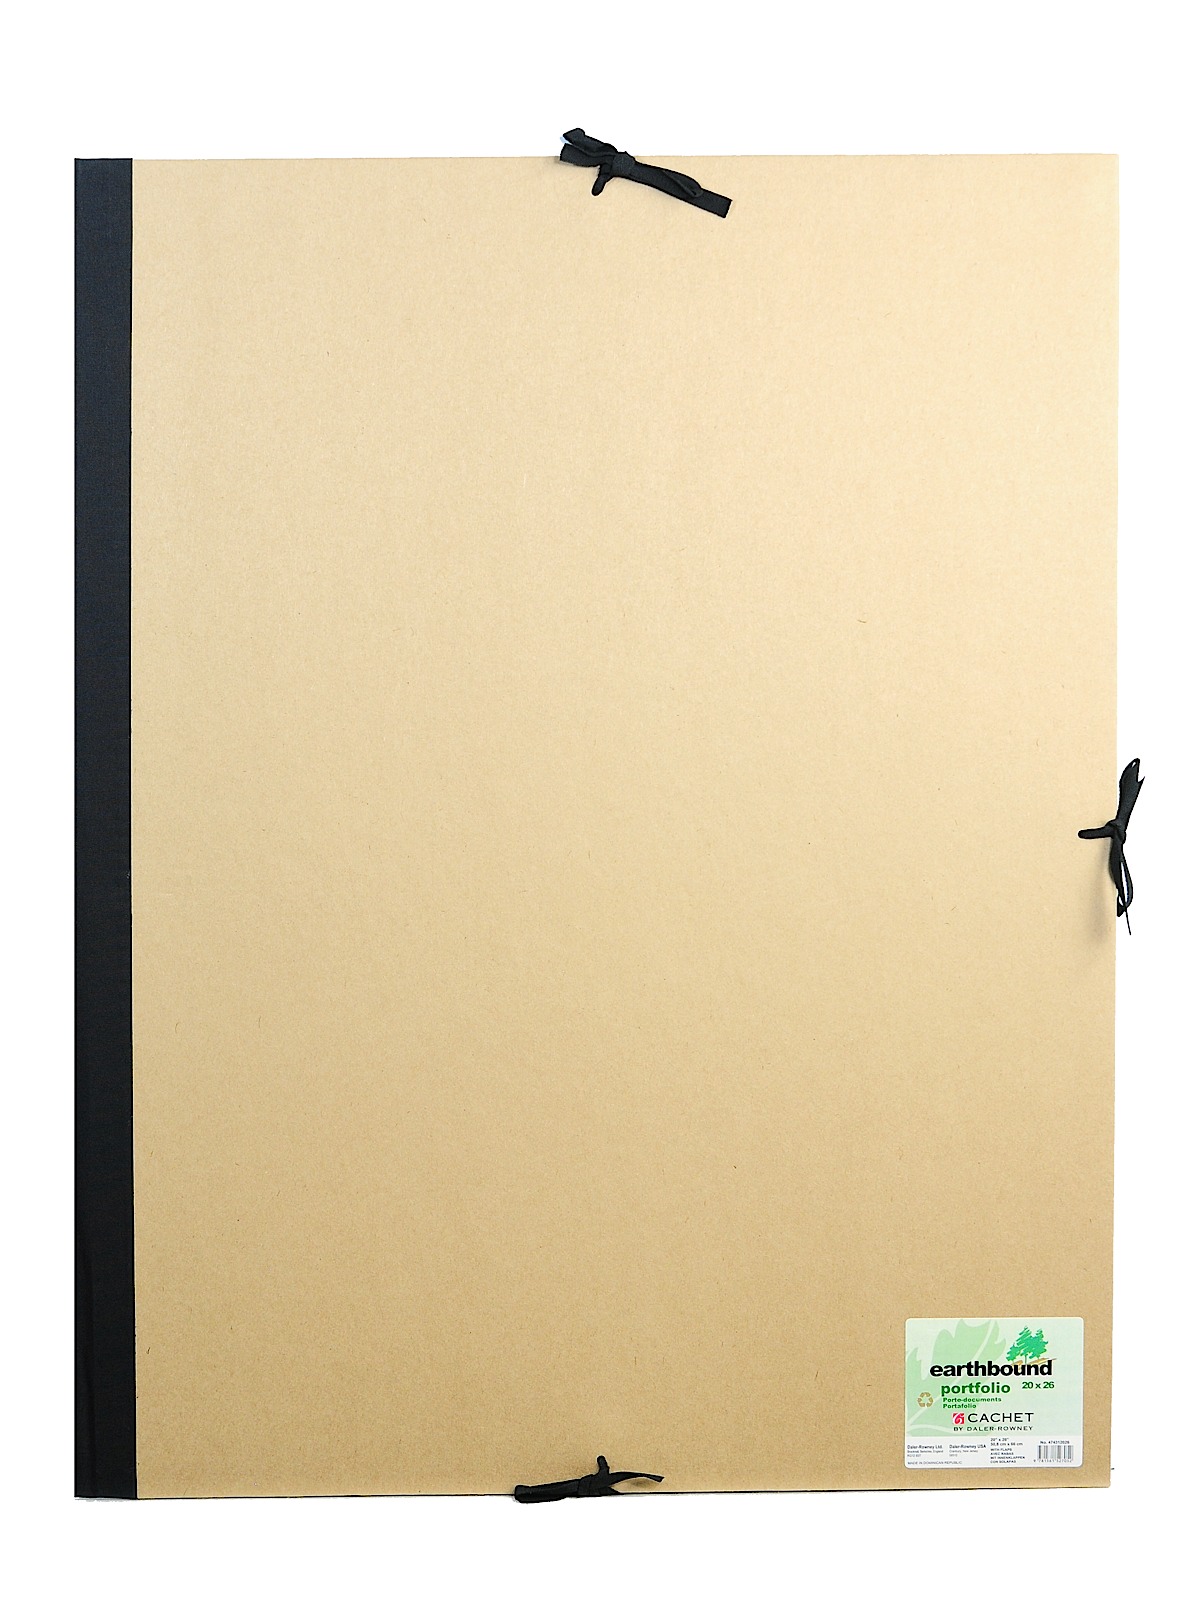 Deluxe Earthbound Portfolio With Flaps 20 In. X 26 In.